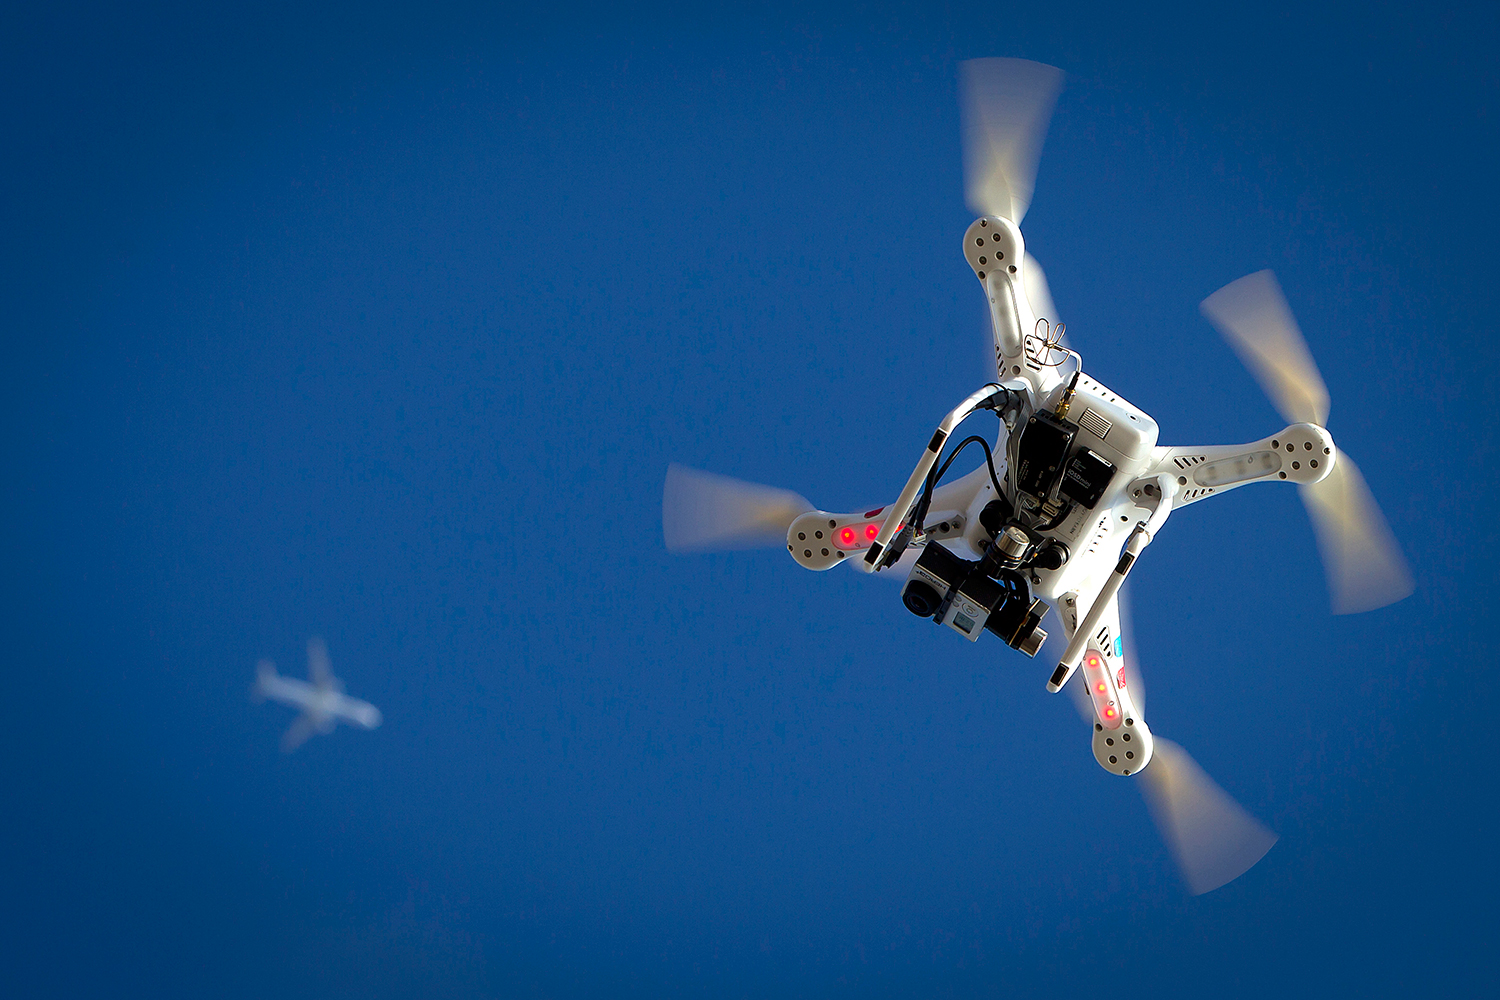 Google will deliver packages with drones in 2017